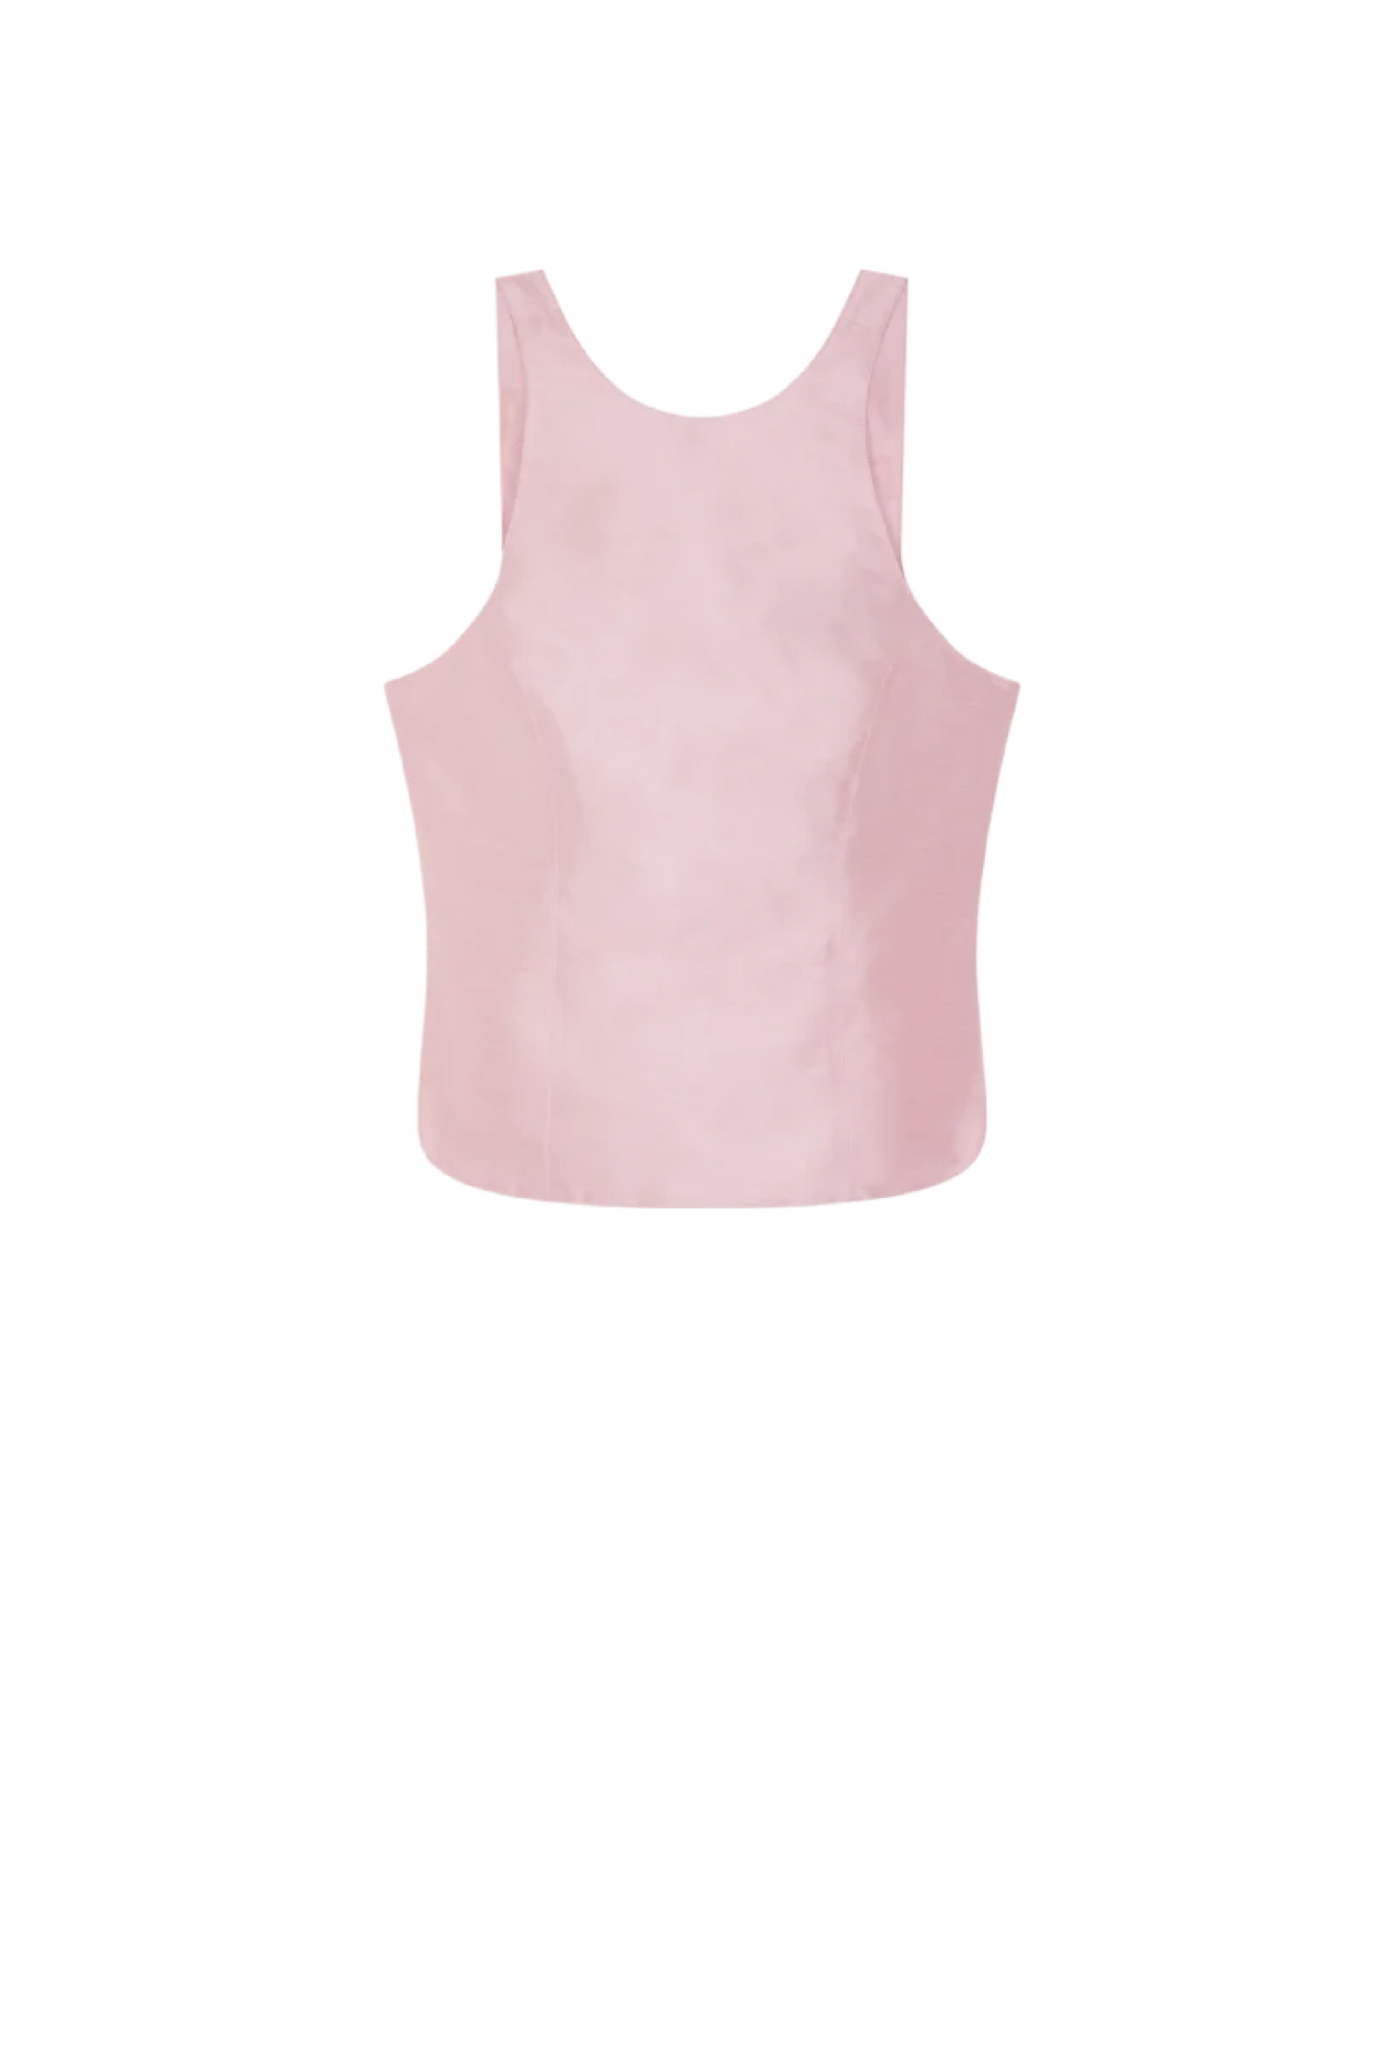 The Backless Top in Pink